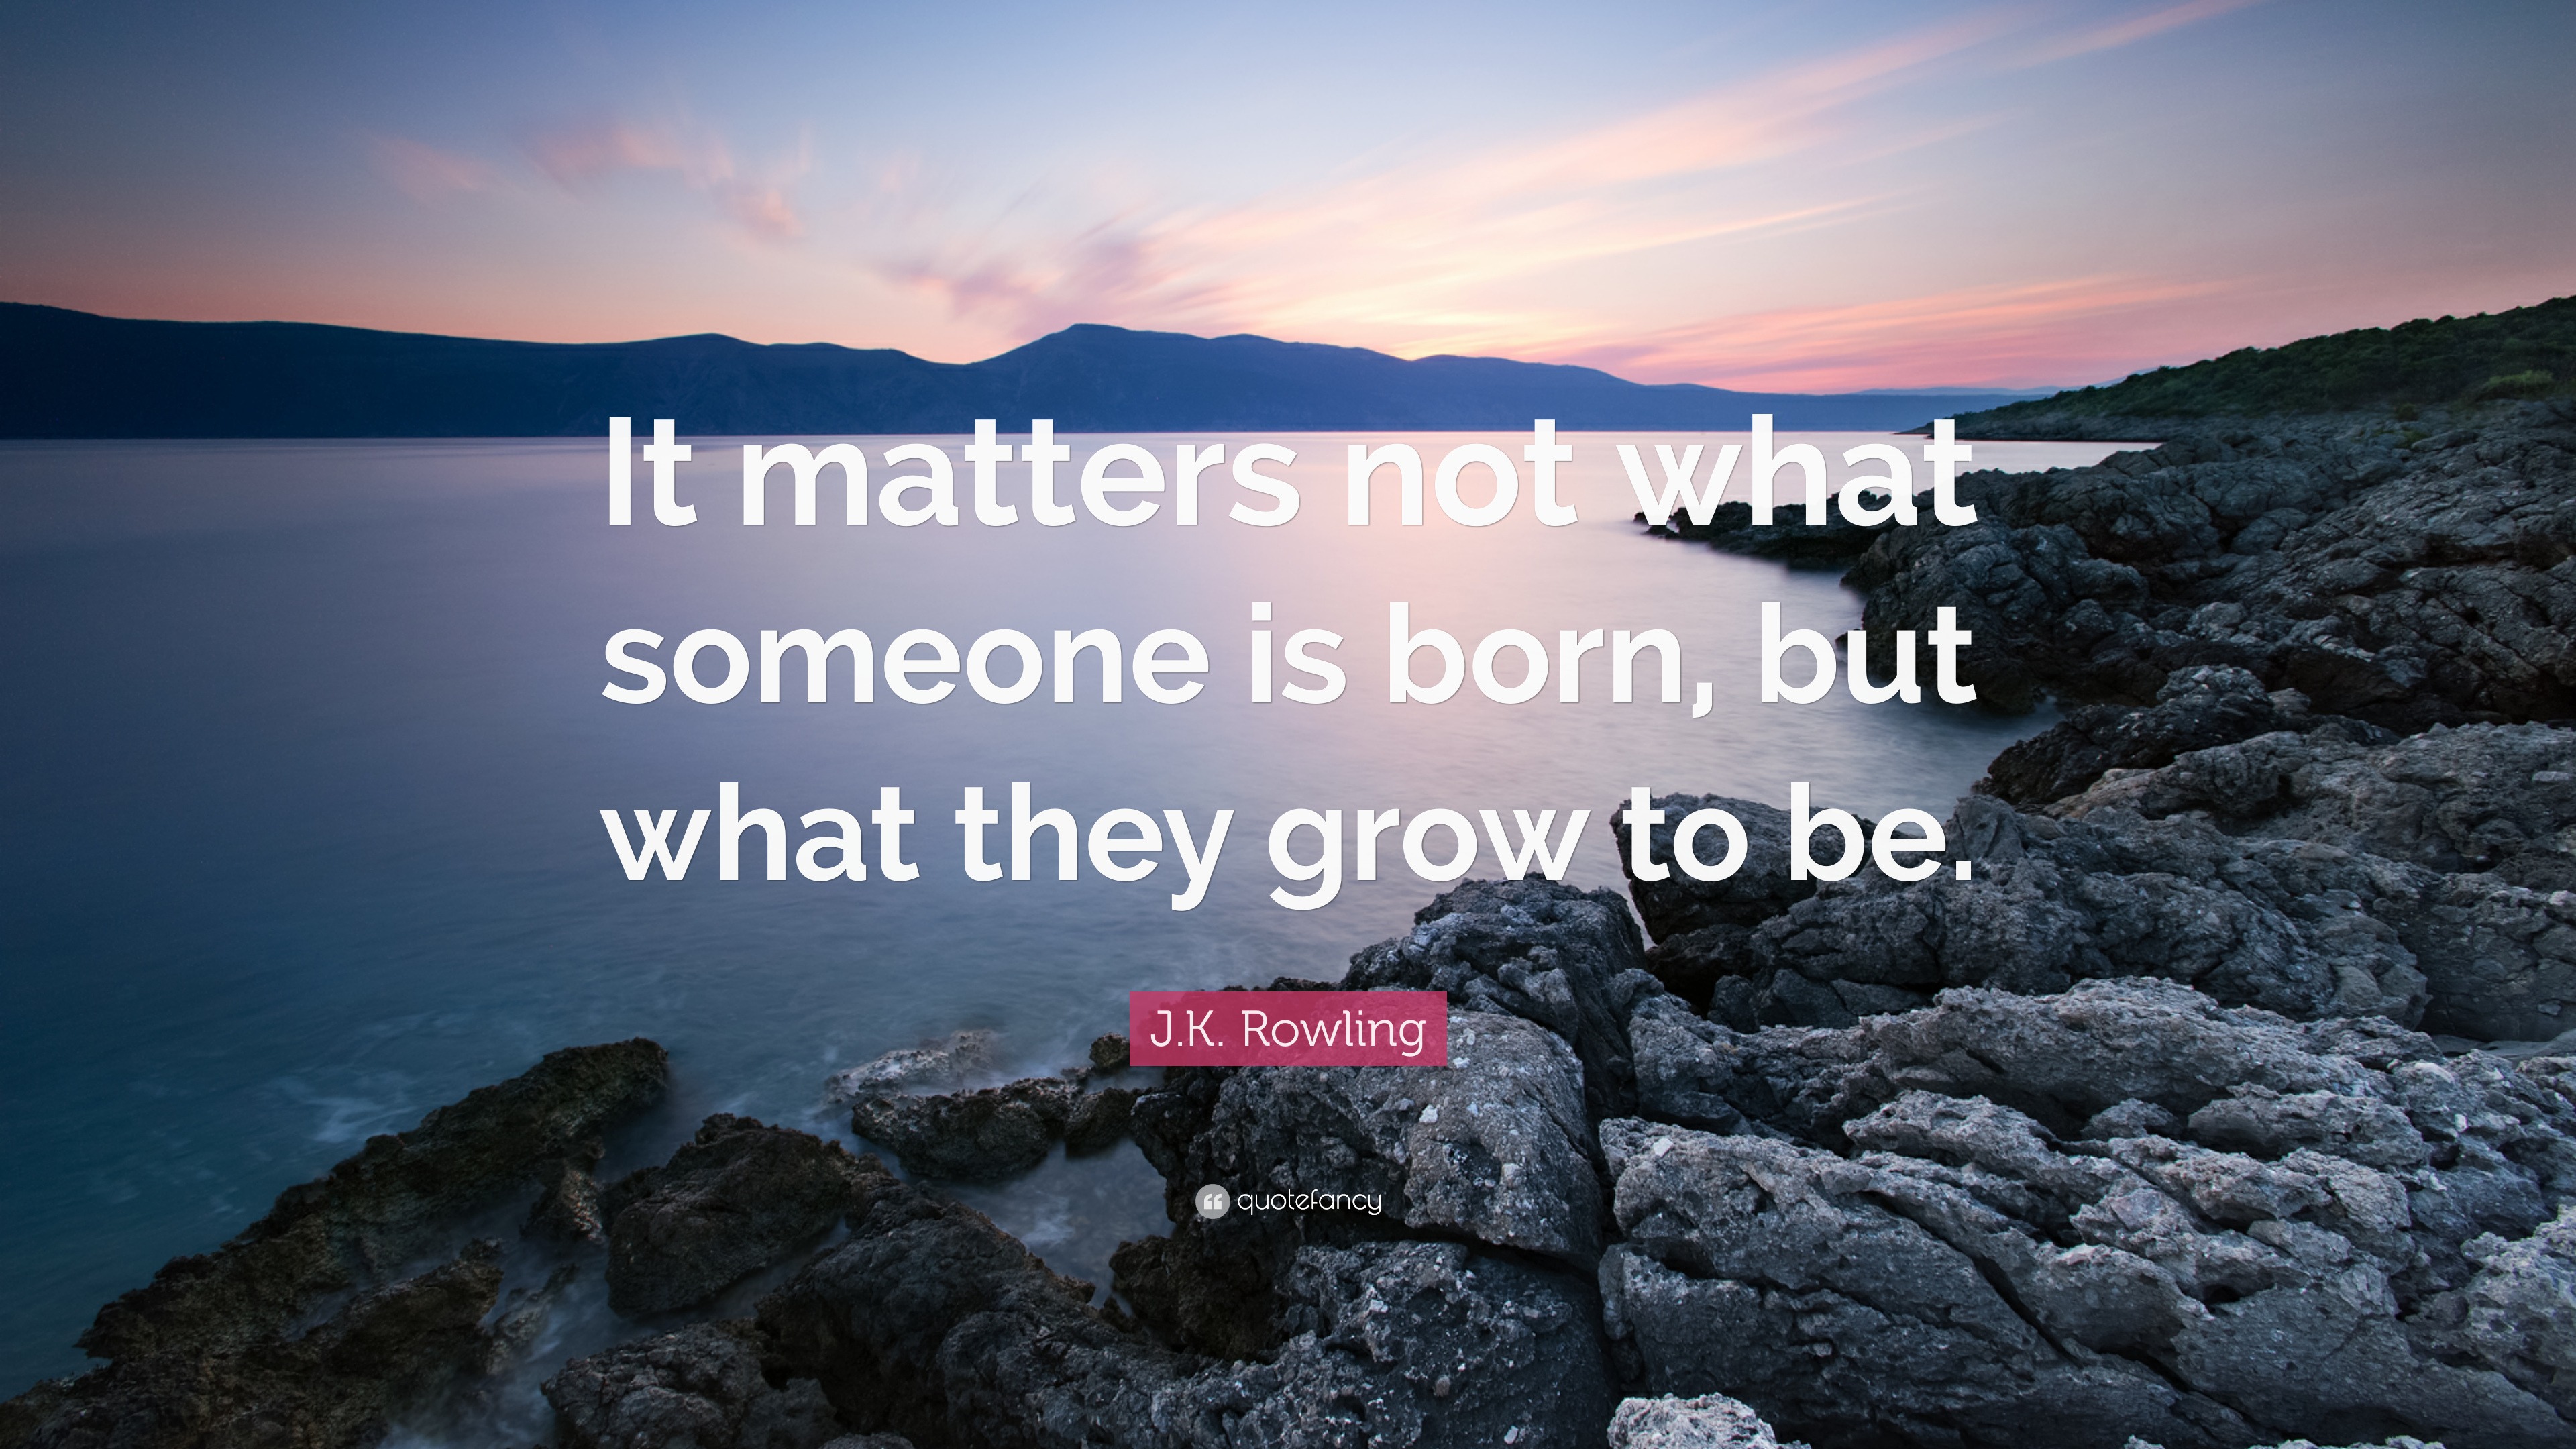 Jk Rowling Quote “it Matters Not What Someone Is Born But What They Grow To Be” 17